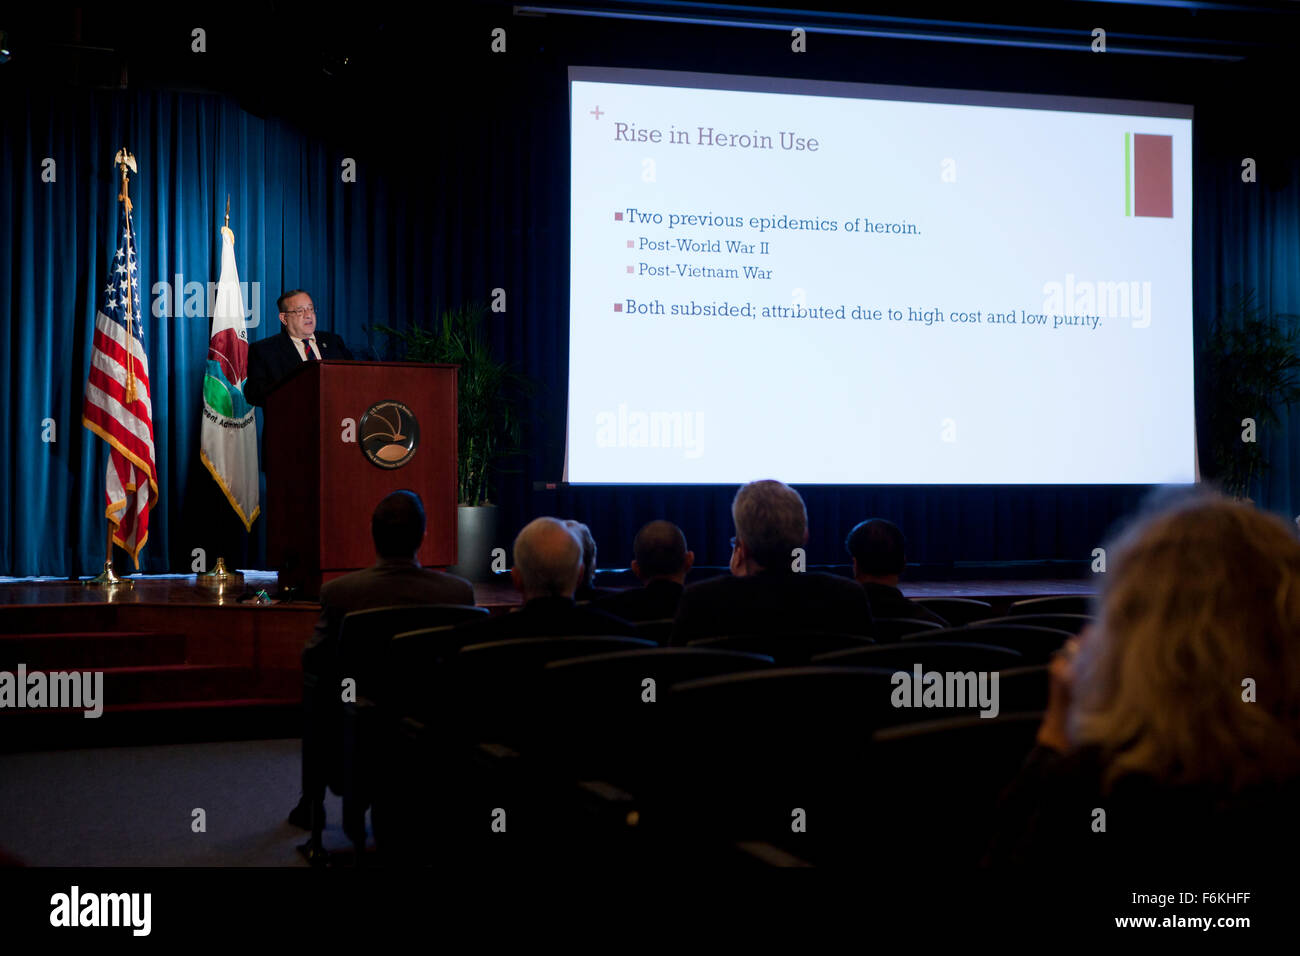 Washington DC, USA. 17th Nov, 2015. Dr. Theodore J. Cicero Professor of Psychiatry at Washington University and Dr. William S, Jacobs, Chief of Addiction Medicine at the Medical College of Georgia speak on Opiate misuse, overdose and addiction at the Drug Enforcement Agency (DEA) headquarters. Credit:  B Christopher/Alamy Live News Stock Photo